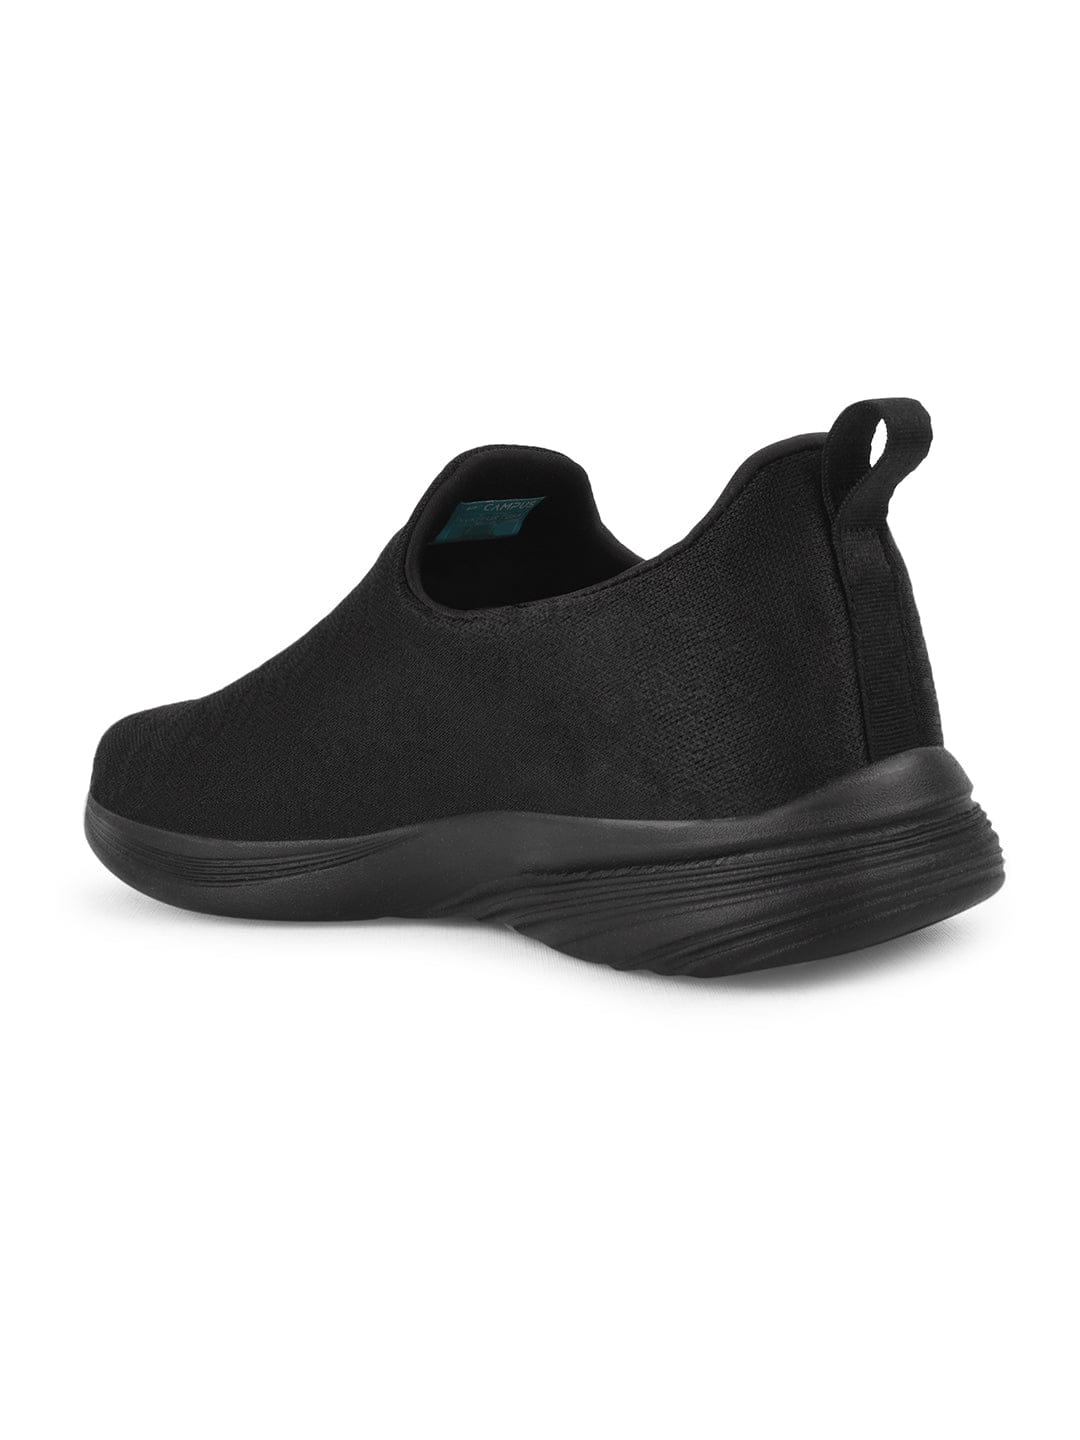 Buy CHARMING Black Women Running Shoes online | Campus Shoes